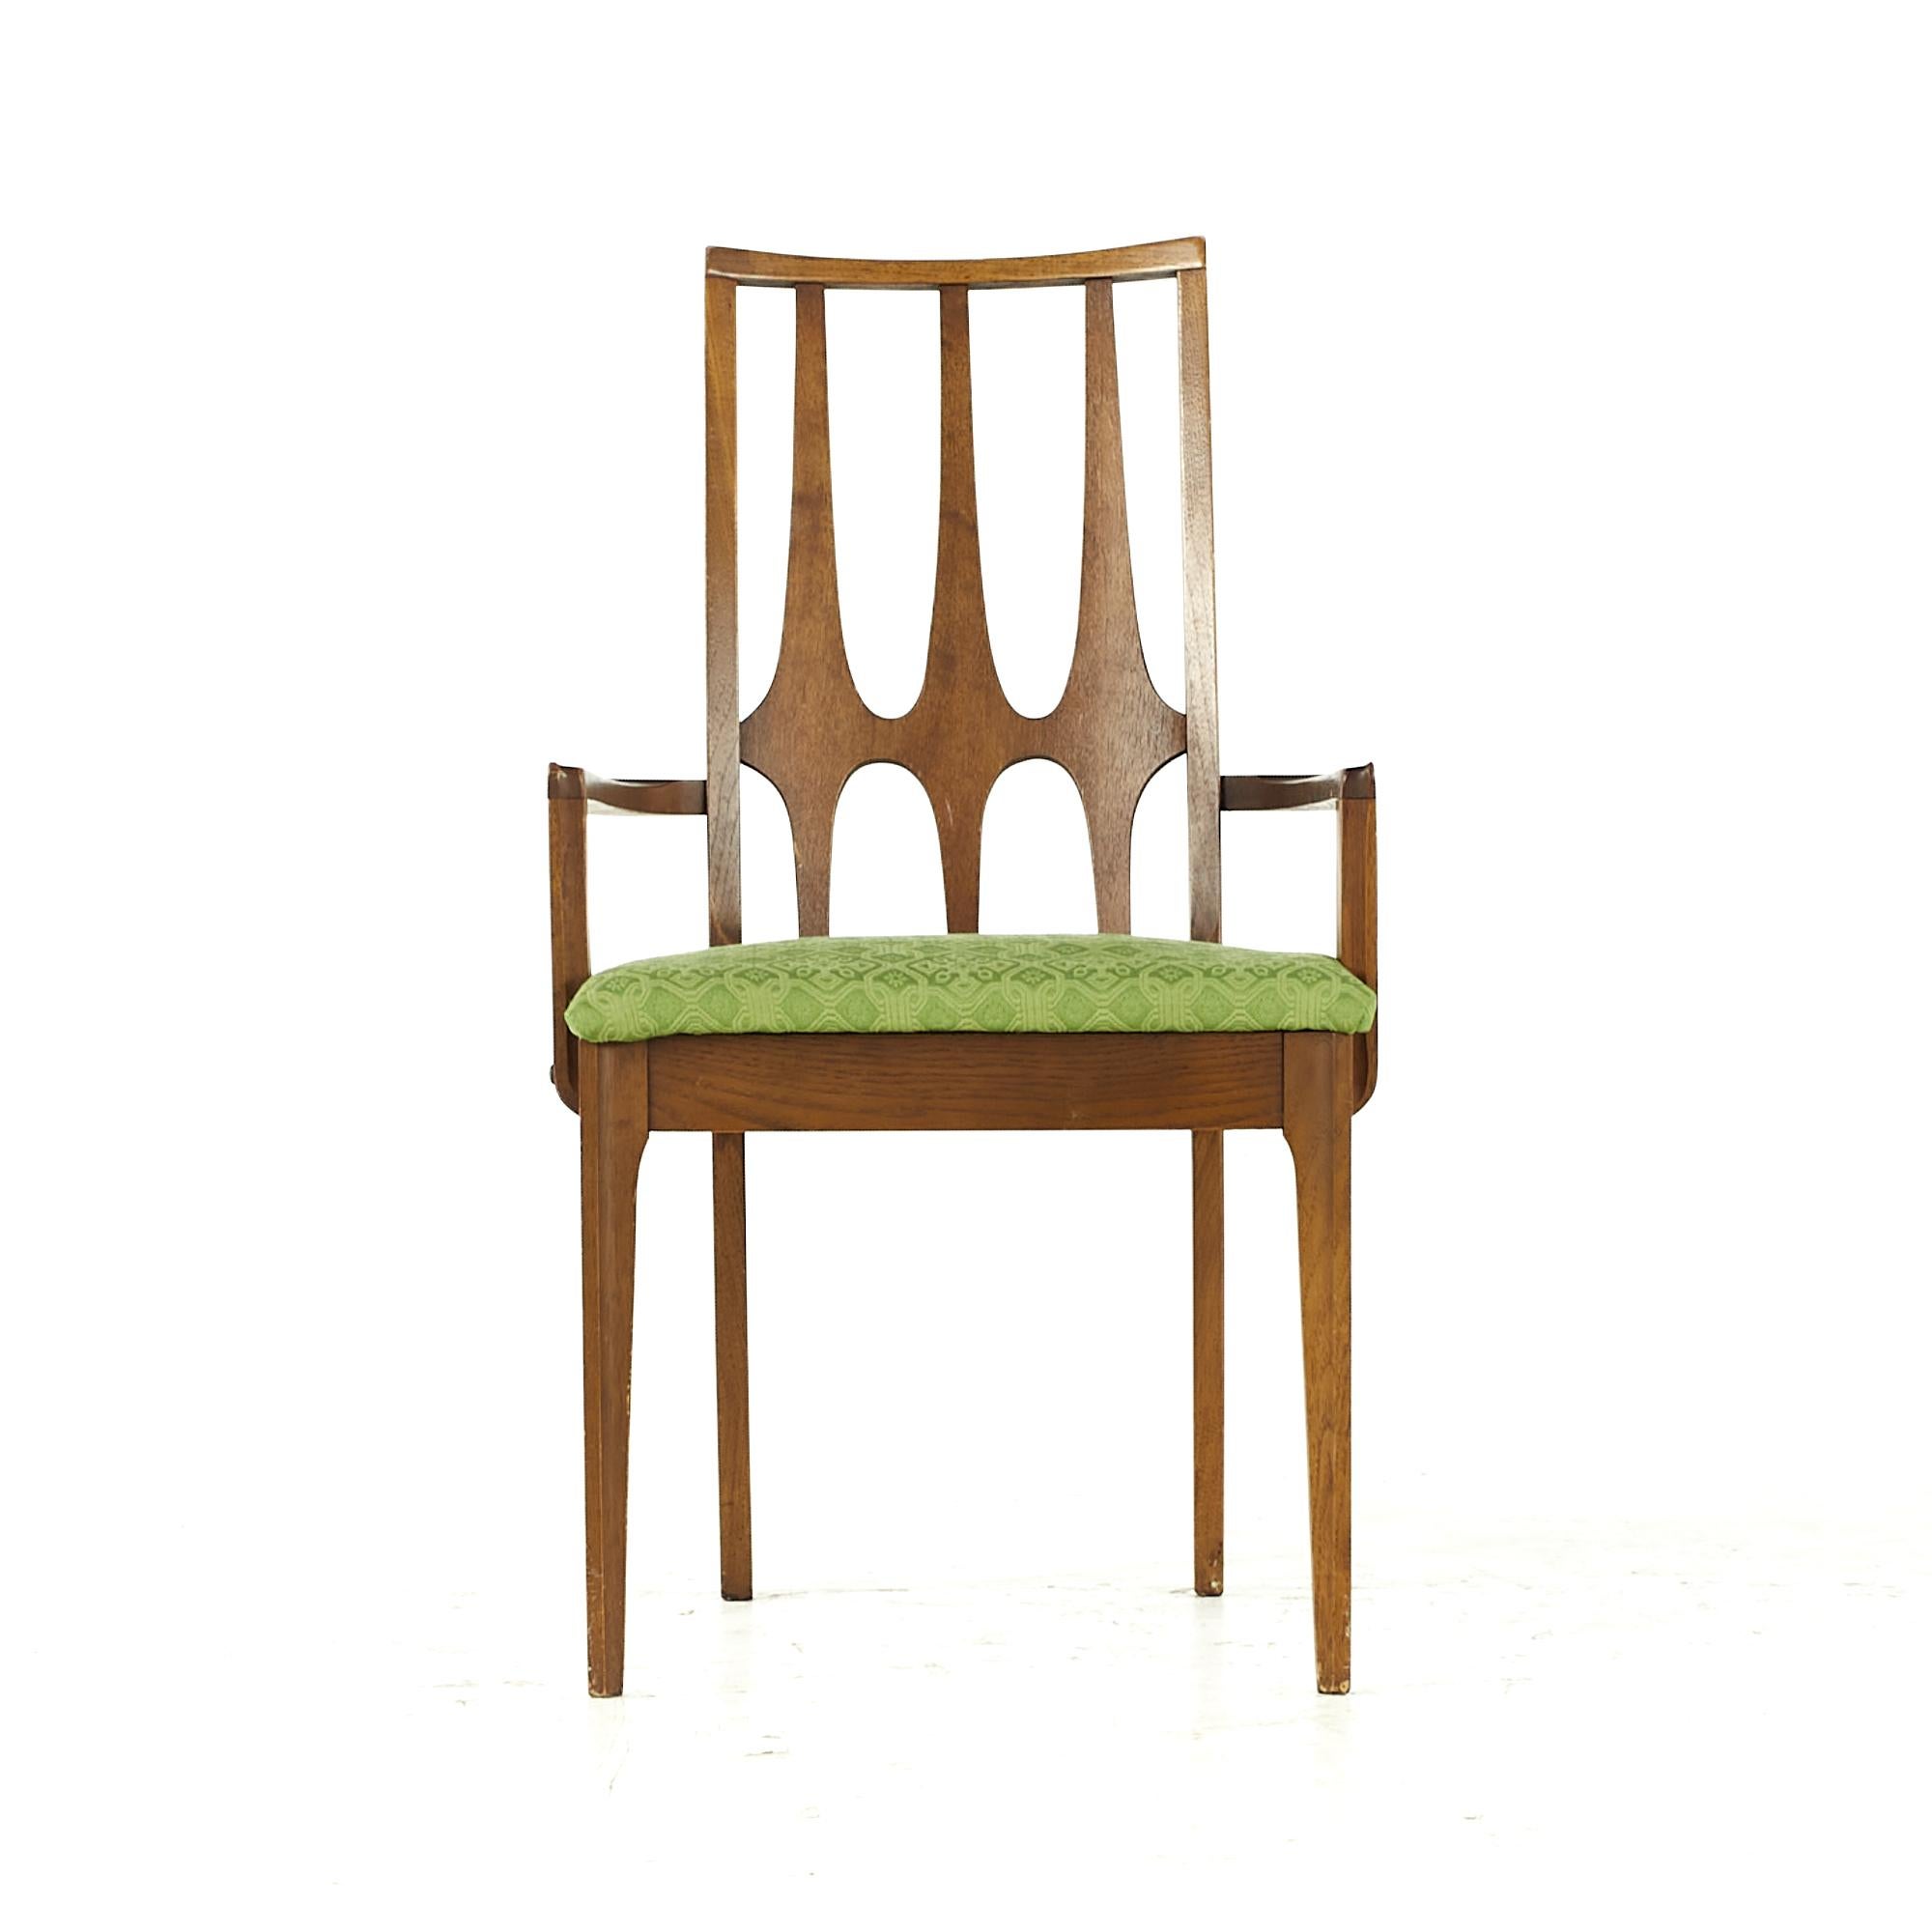 Broyhill Brasilia Midcentury Dining Chairs with 1 Captain, Set of 5 For Sale 2